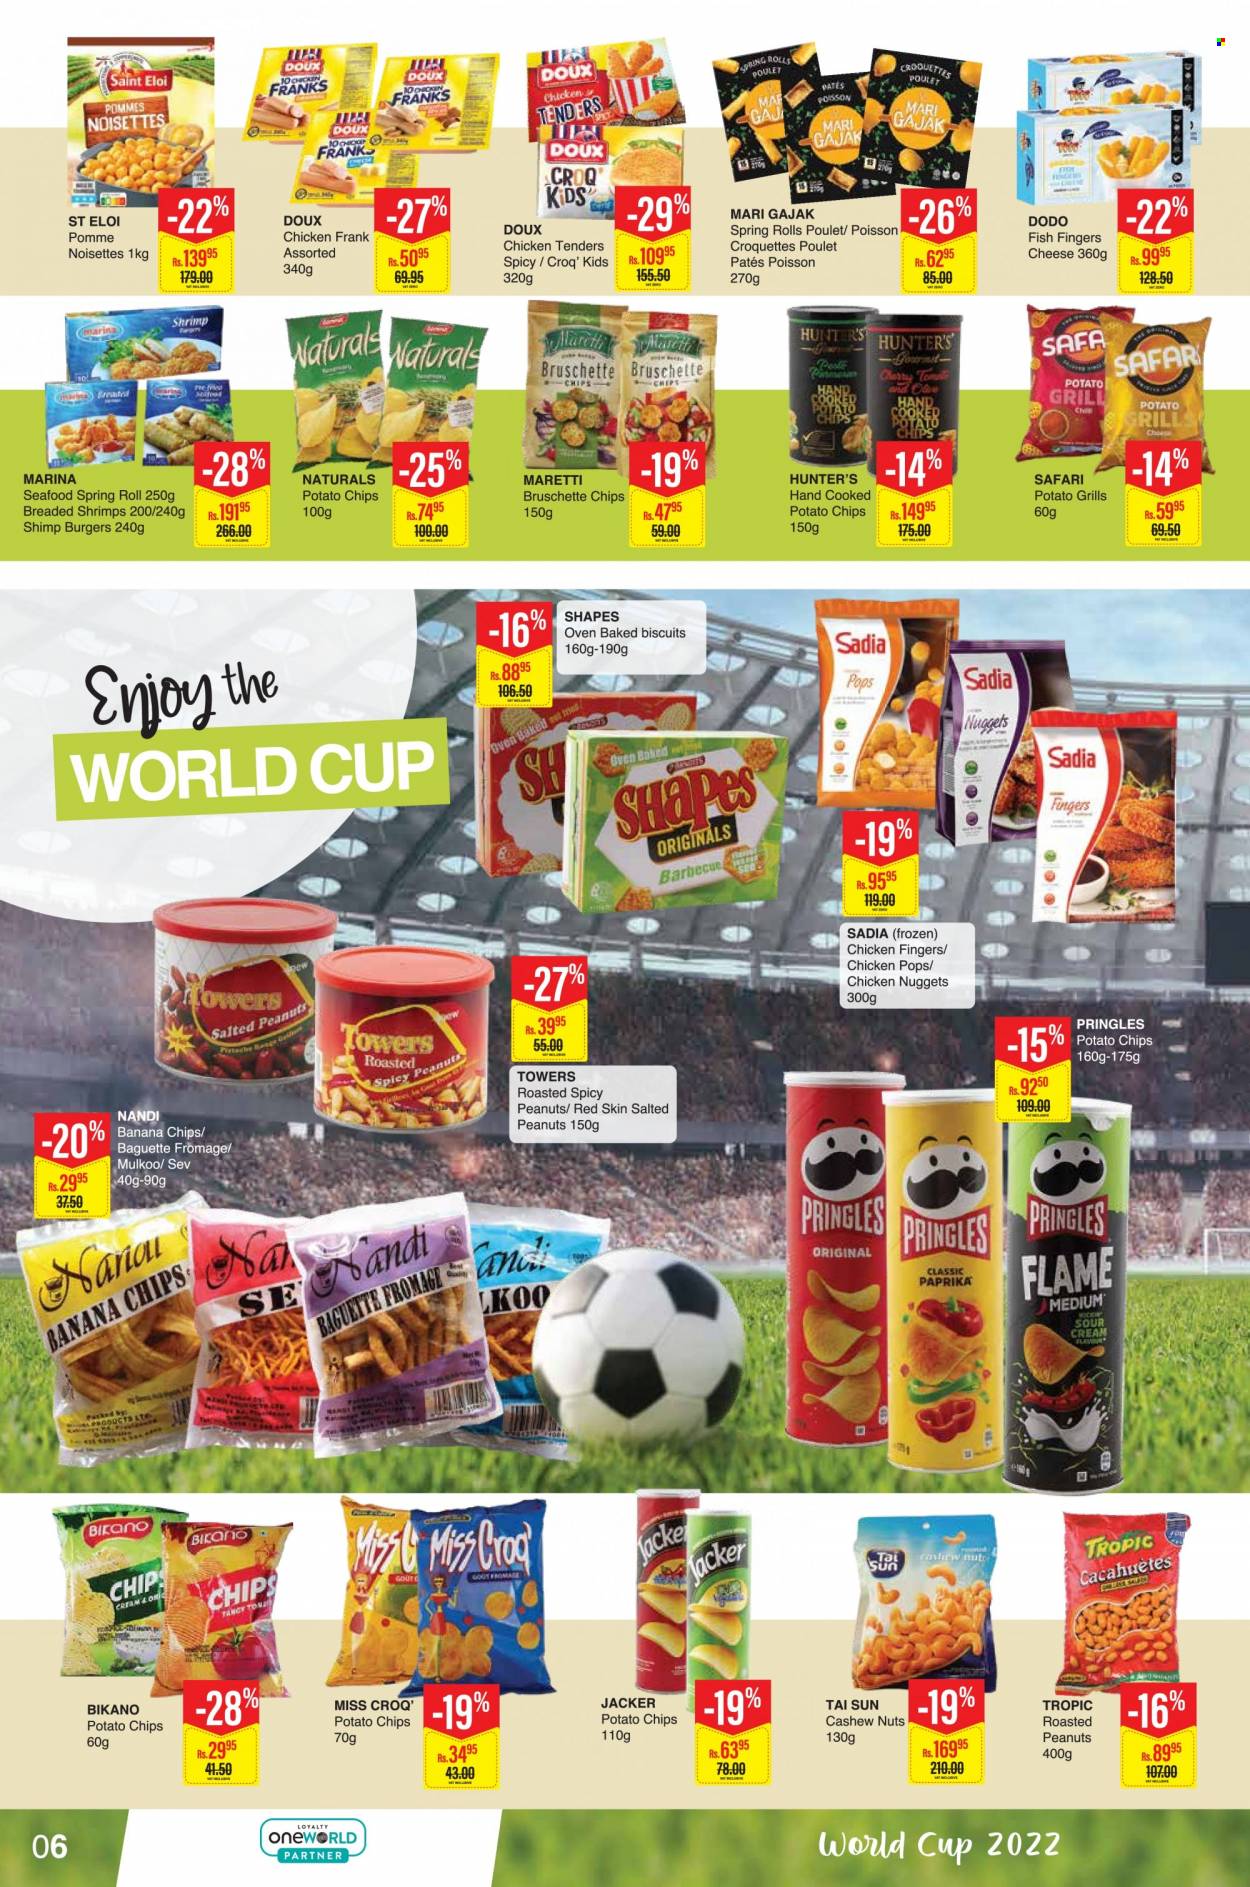 thumbnail - Intermart Catalogue - 23.11.2022 - 20.12.2022 - Sales products - cherries, seafood, fish, shrimps, fish fingers, fish sticks, chicken tenders, nuggets, hamburger, chicken nuggets, spring rolls, chicken frankfurters, cheese, sour cream, potato croquettes, biscuit, Santa, potato chips, Pringles, cashews, roasted peanuts, peanuts, dried fruit, Tai Sun, banana chips, cup, Hunter, baguette. Page 6.